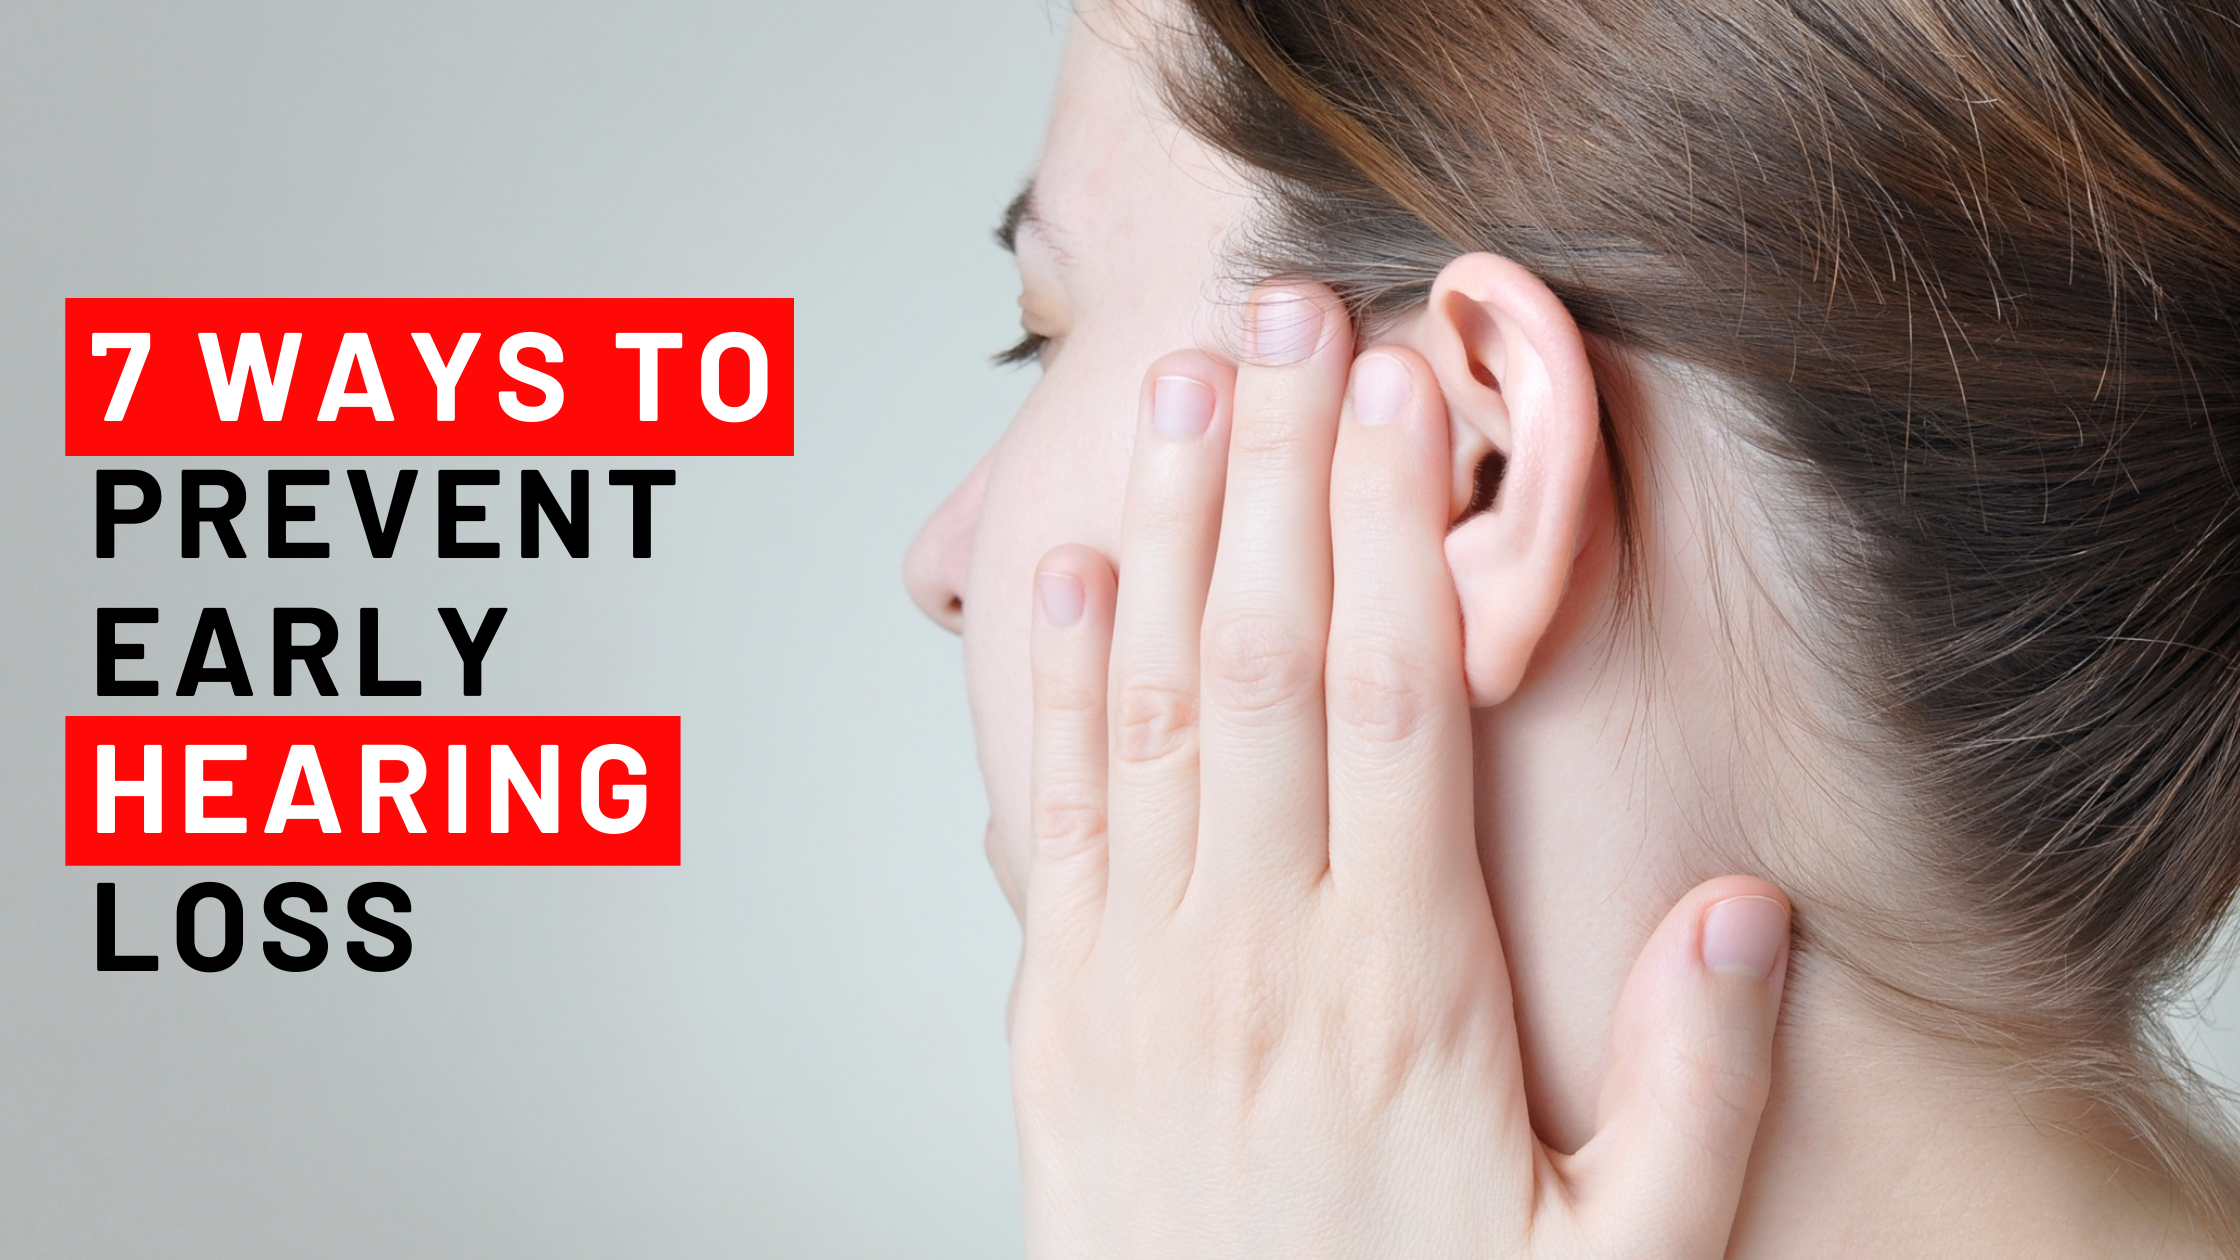 7 Ways to Prevent Early Hearing Loss